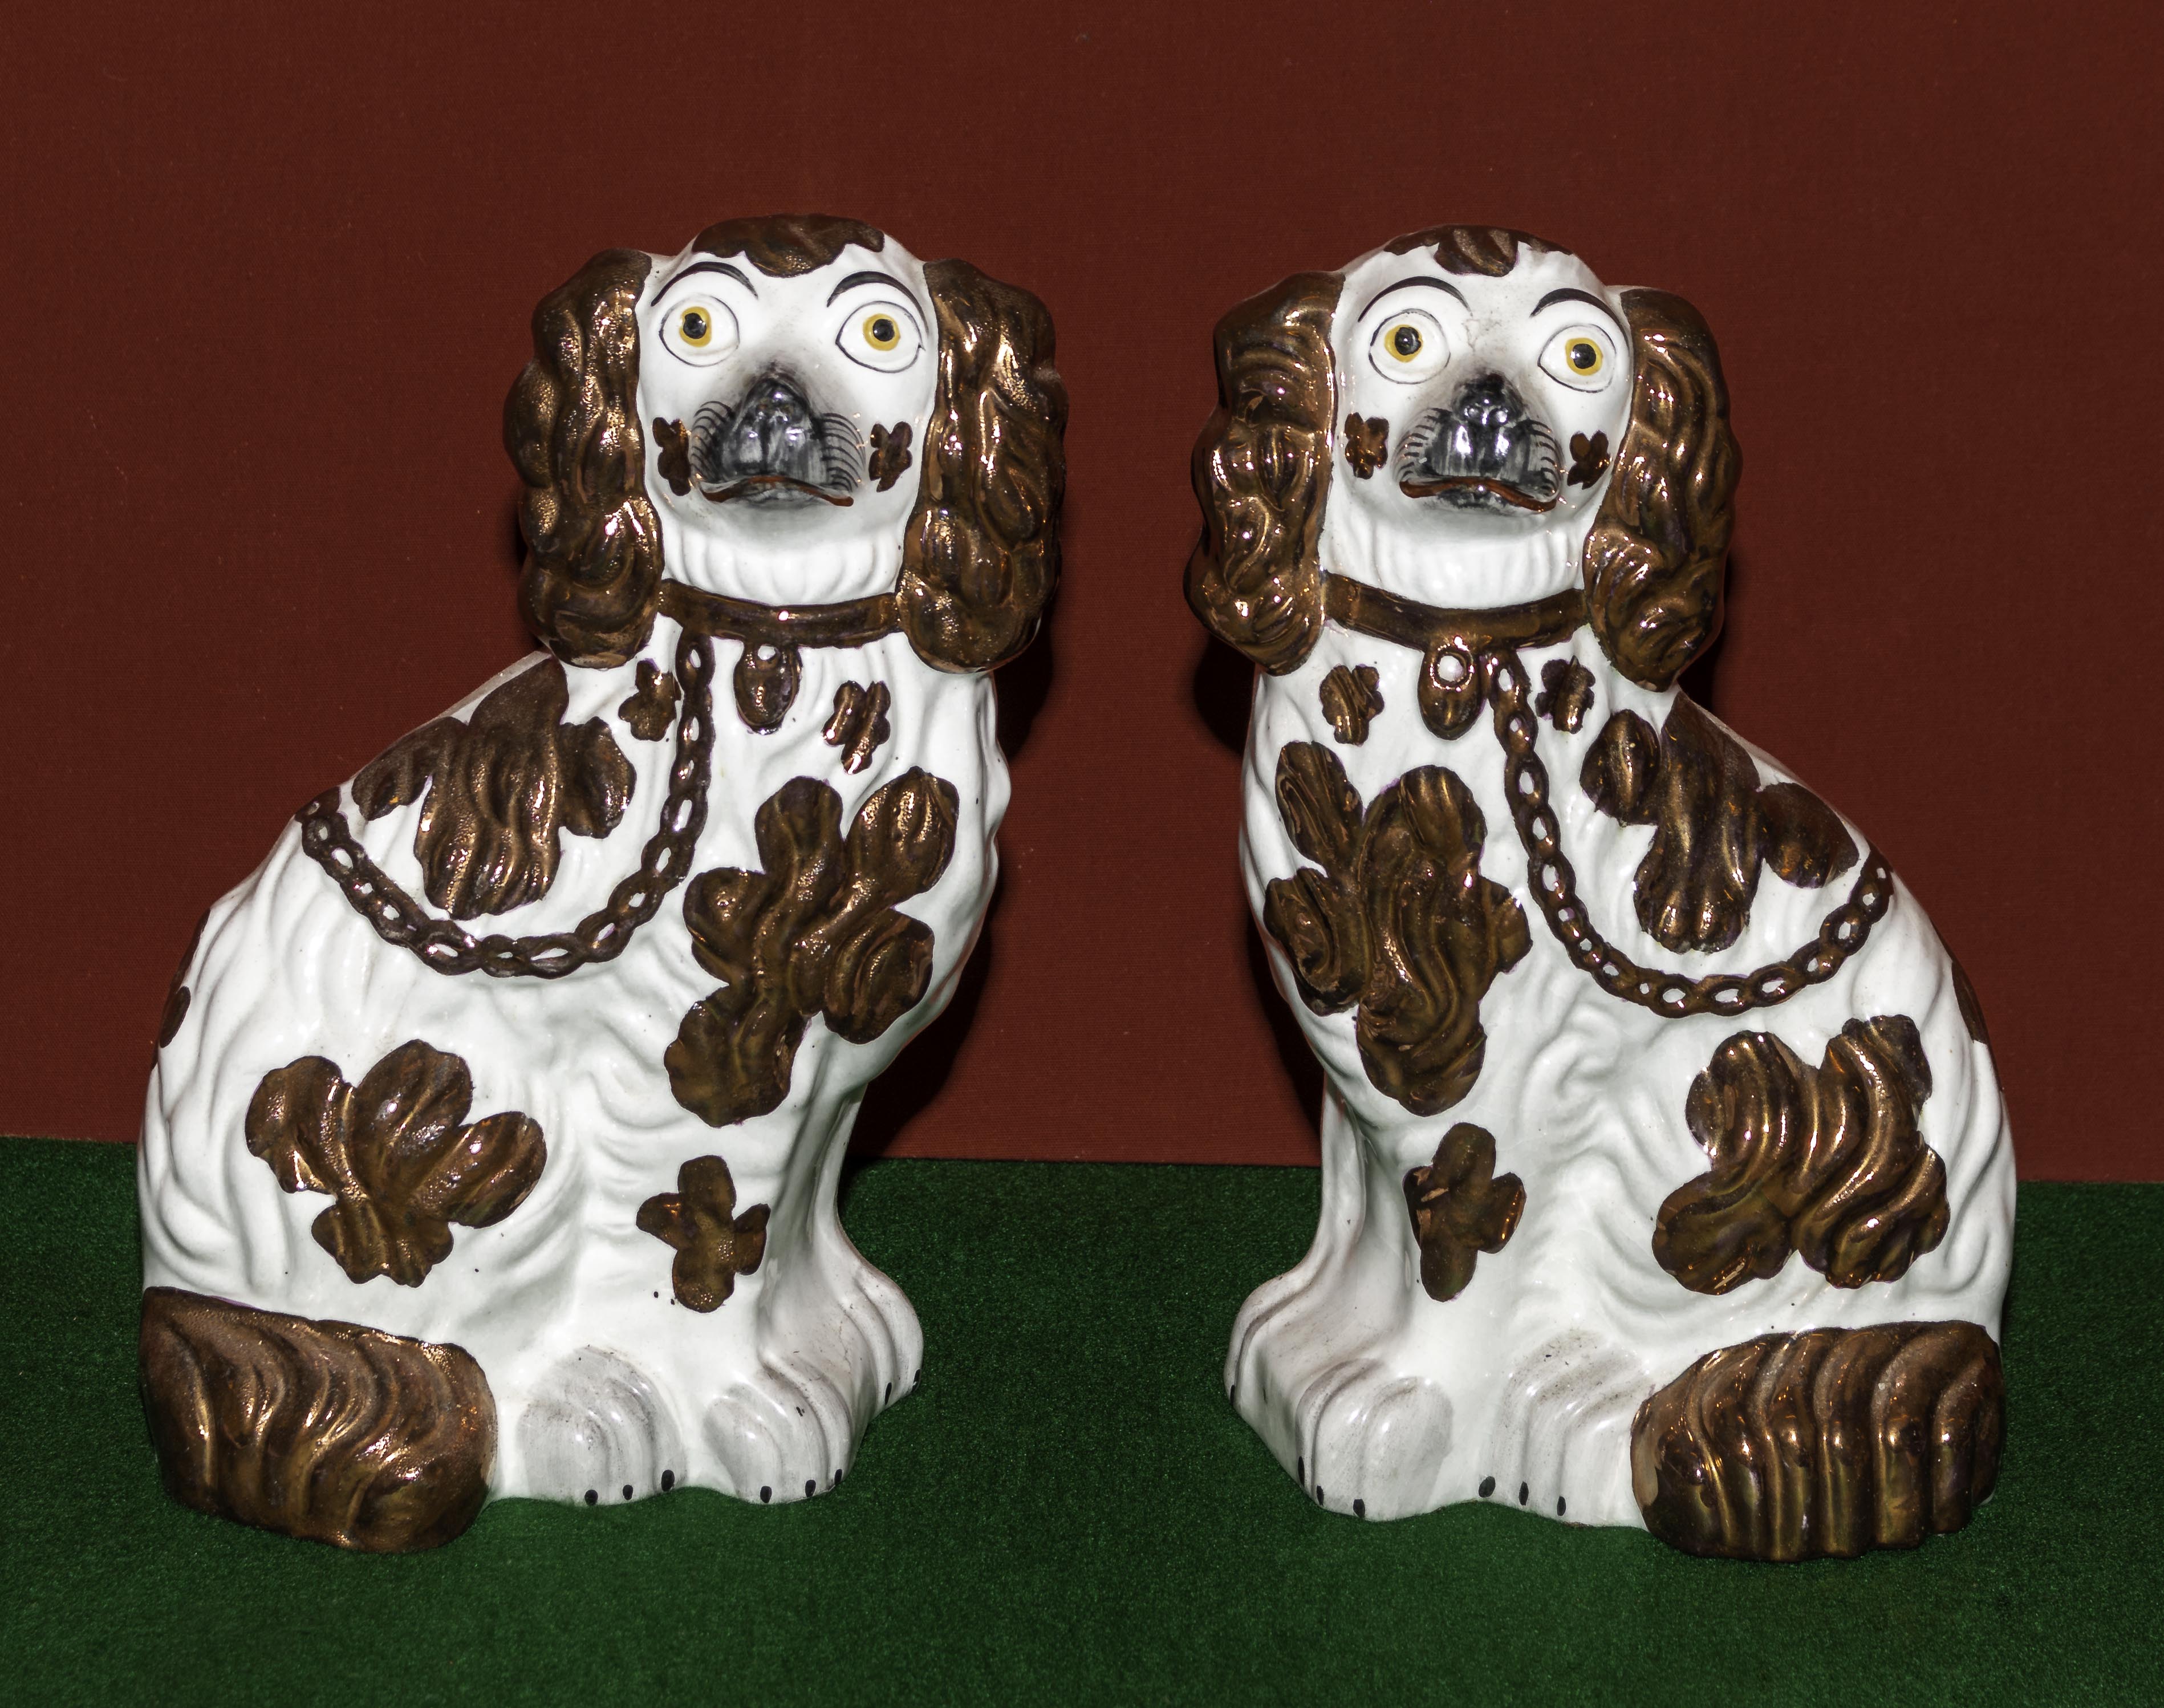 A pair of Staffordshire wally dogs